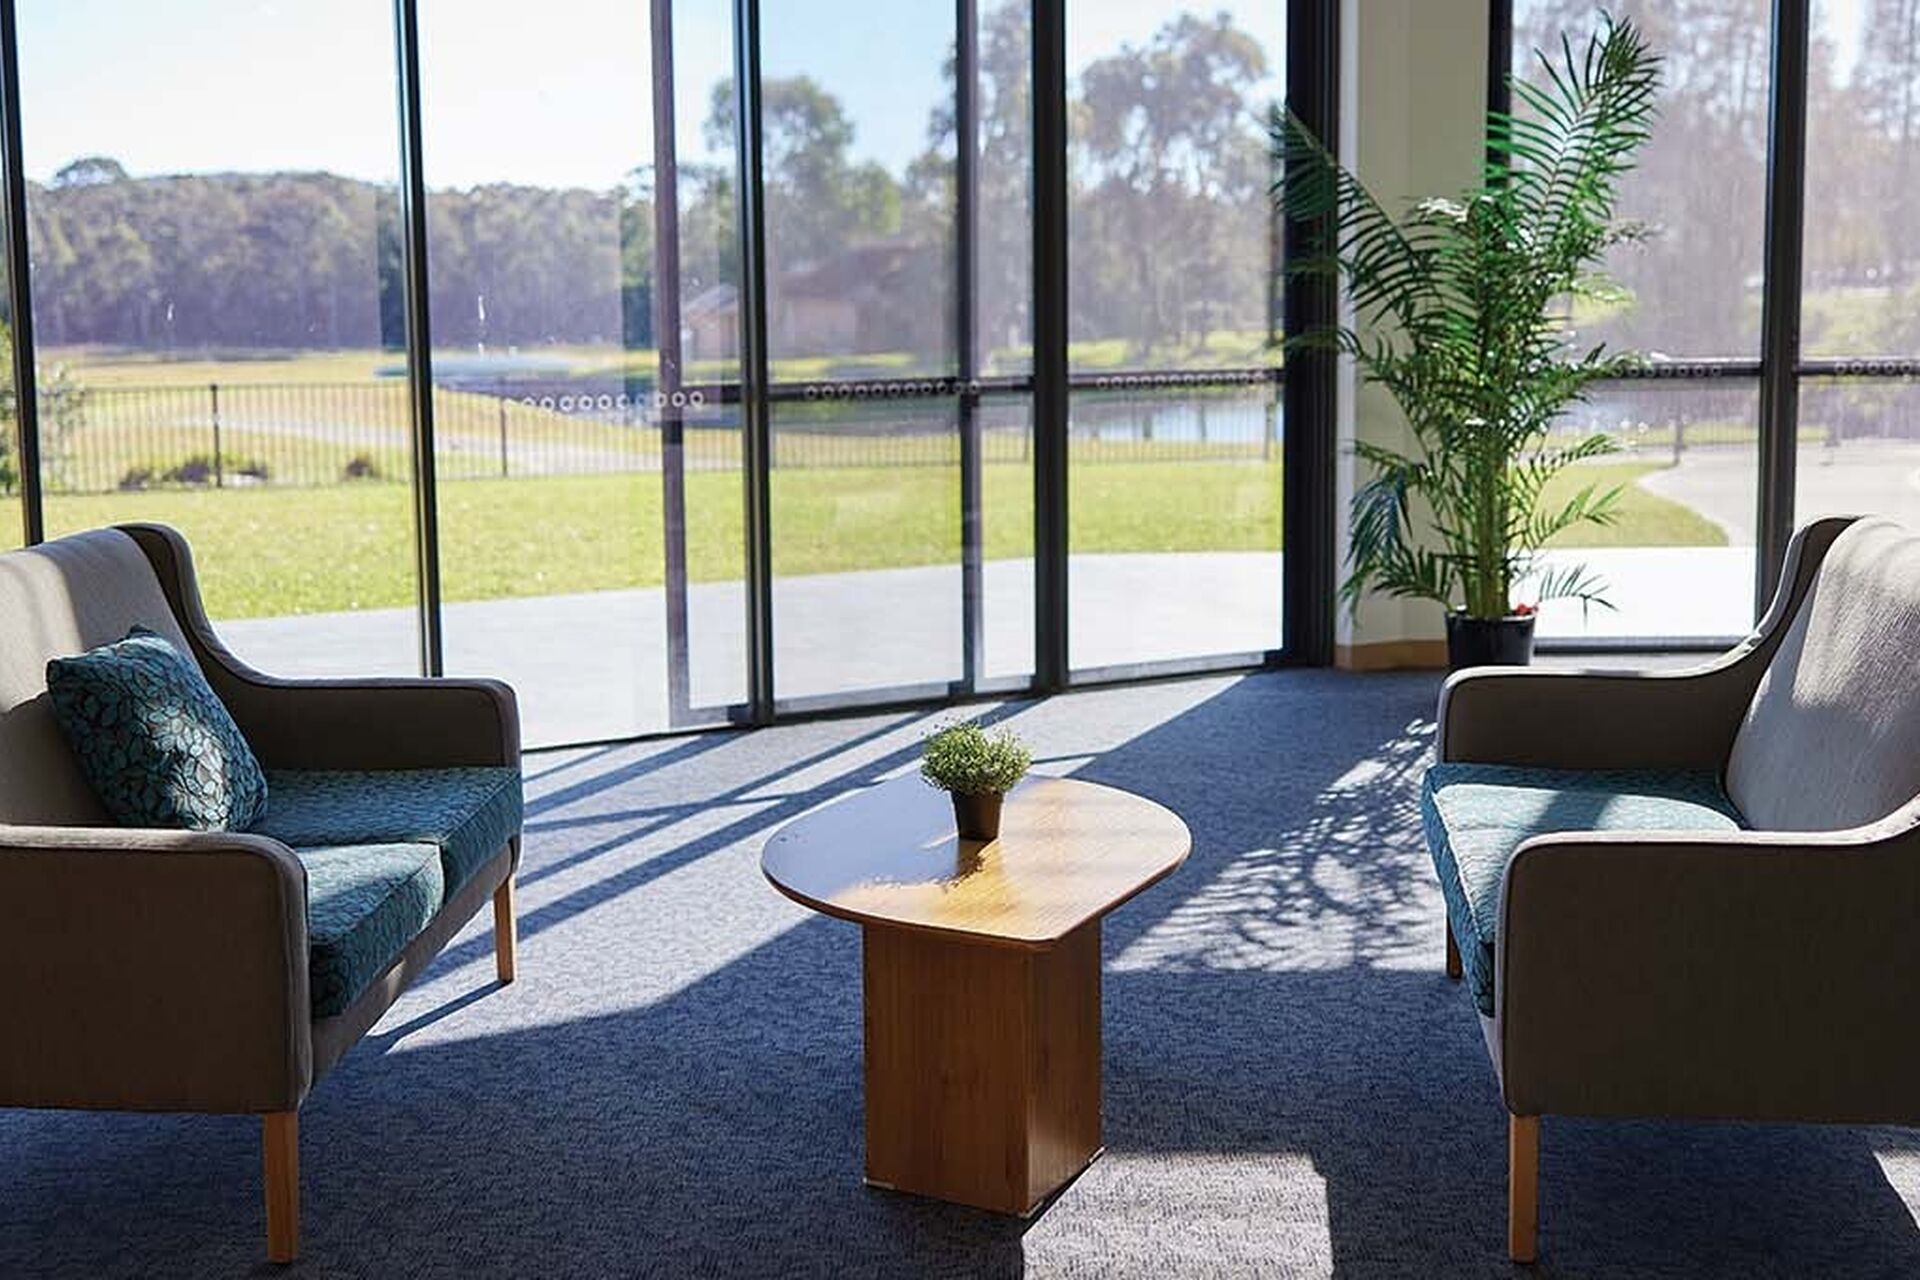 aged care resident sitting area natural sunlight baptistcare bethshan gardens centre aged care home in wyee nsw lake macquarie